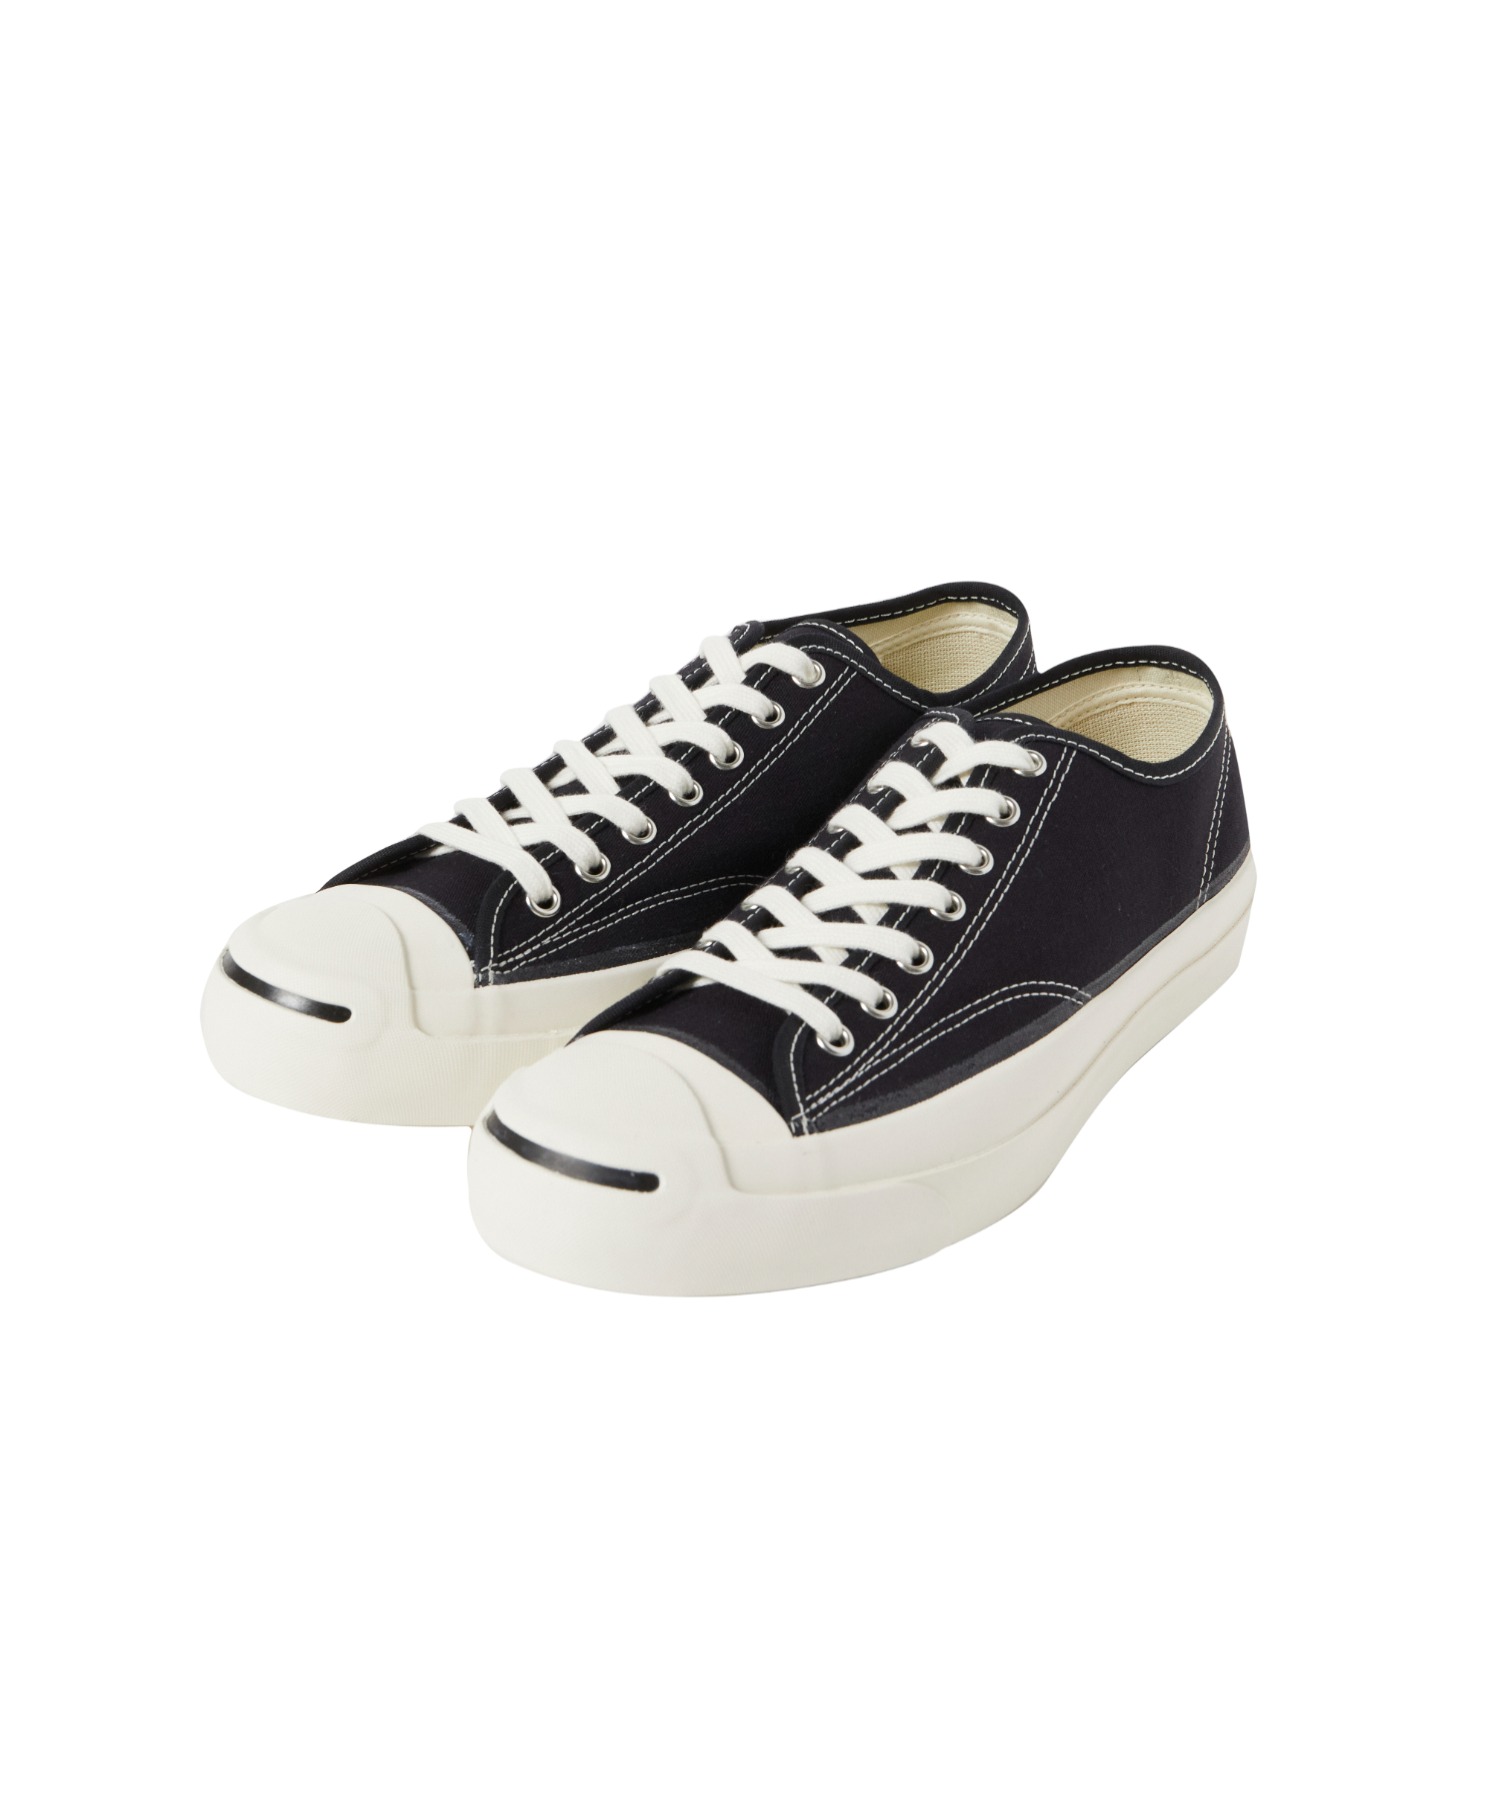 CONVERSE ADDICT【JACK PURCELL CANVAS】